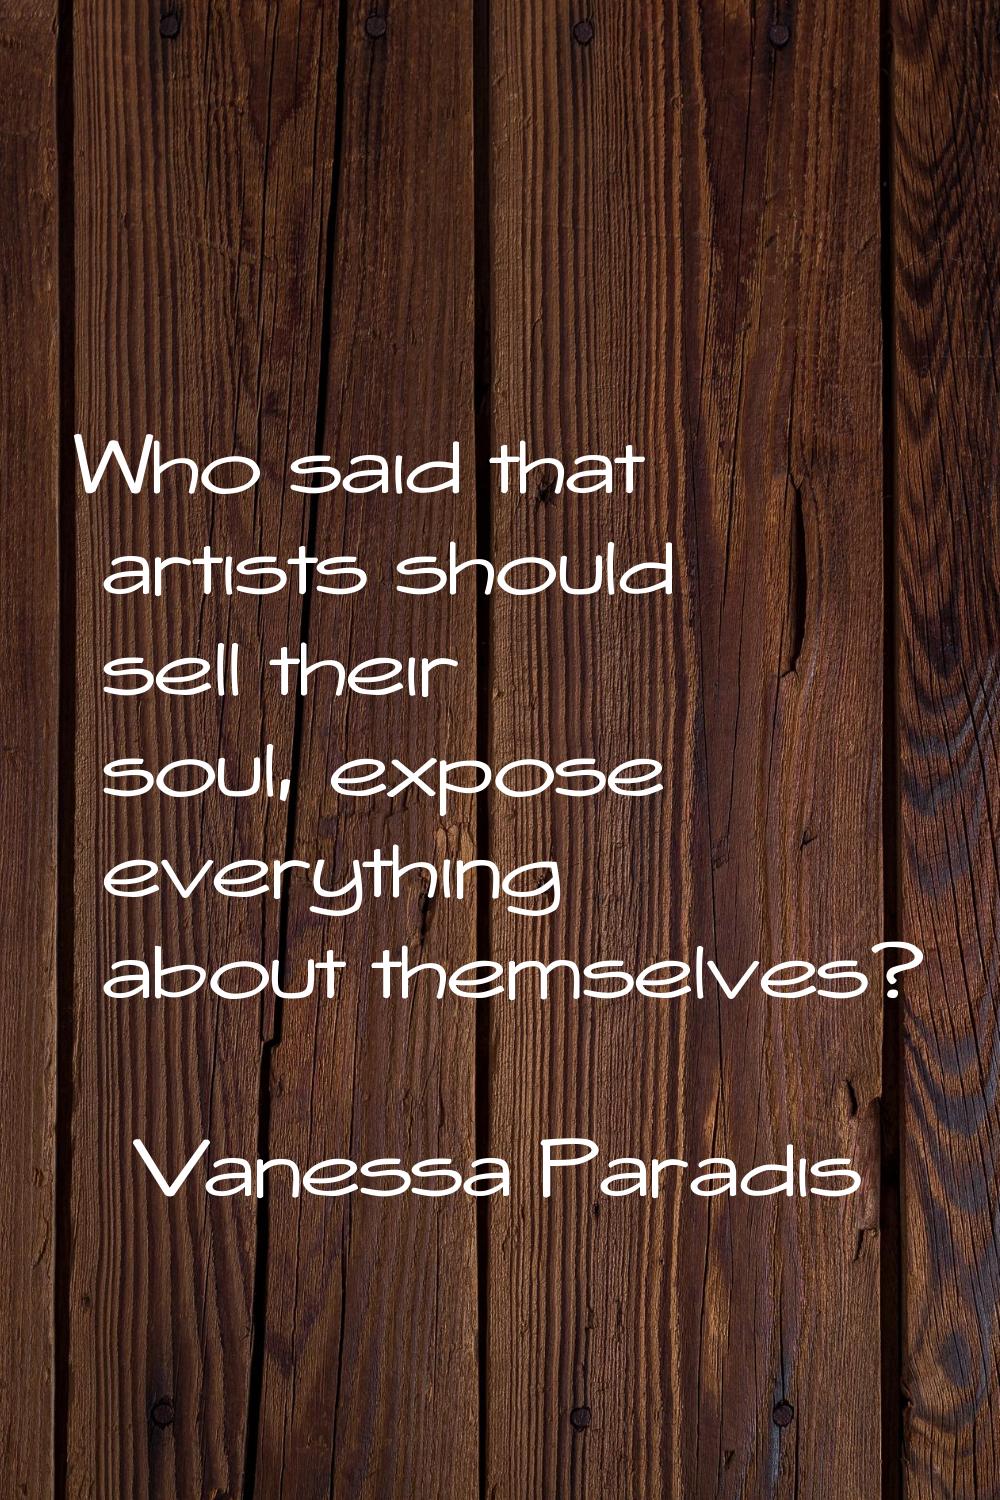 Who said that artists should sell their soul, expose everything about themselves?